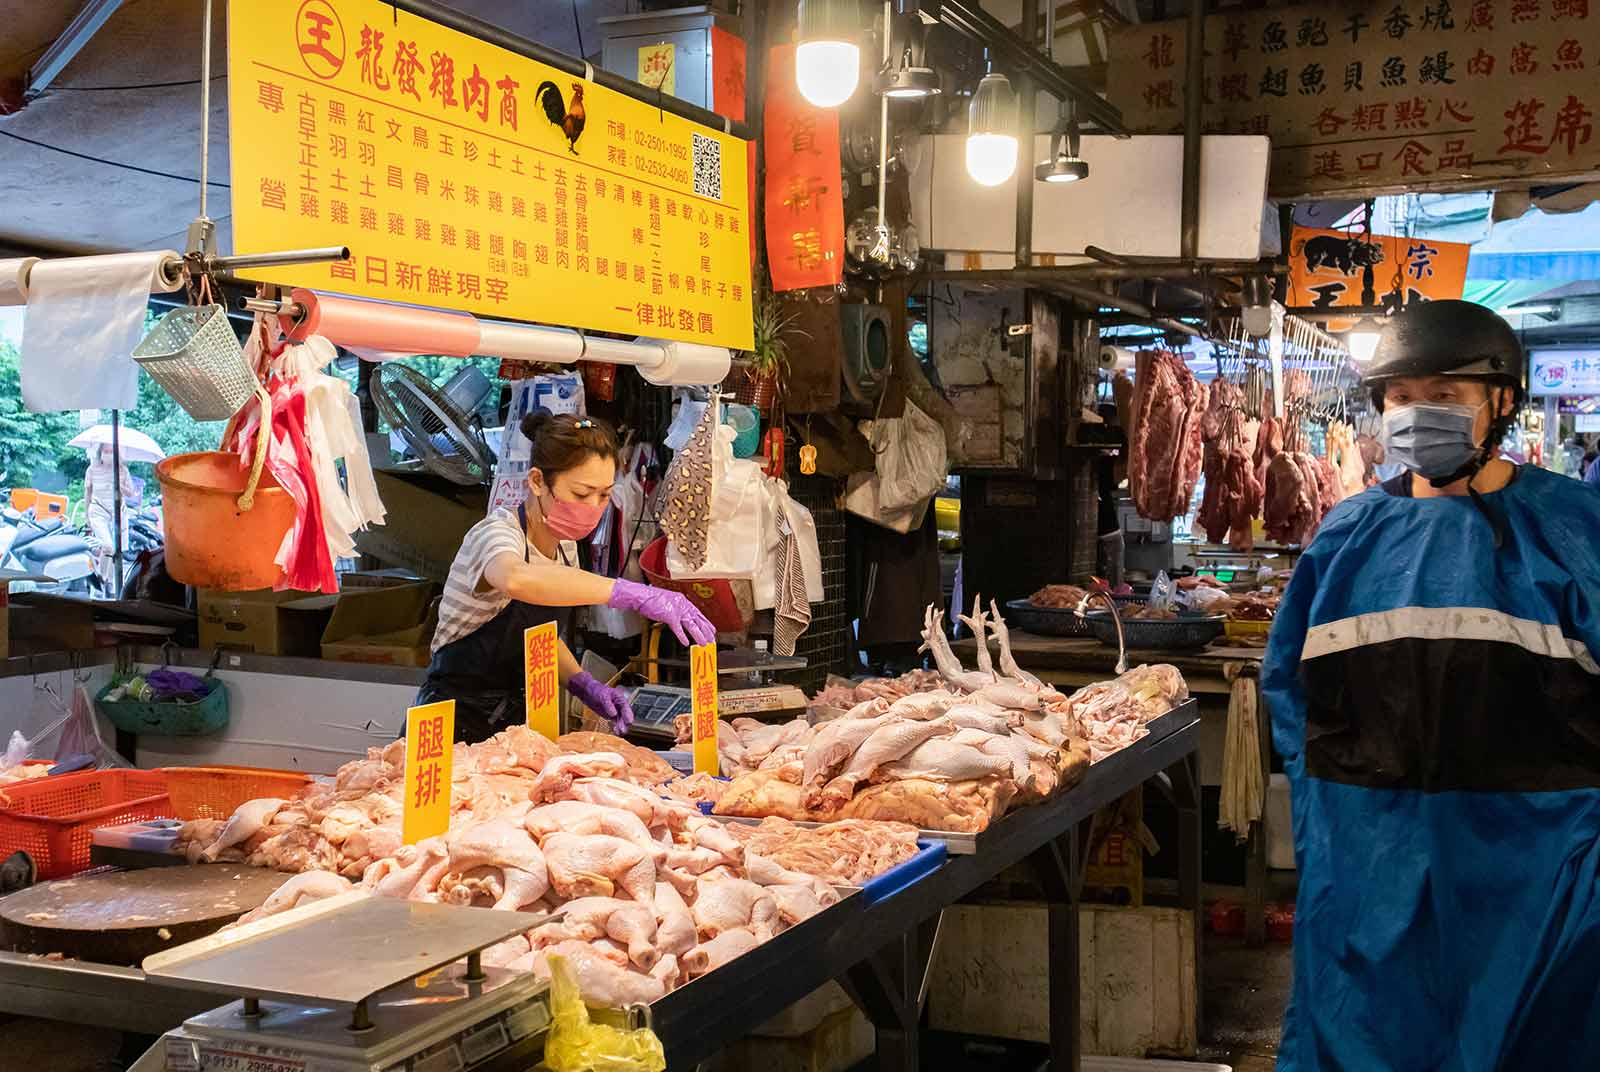 Is Taiwan headed for full-fledged inflation?